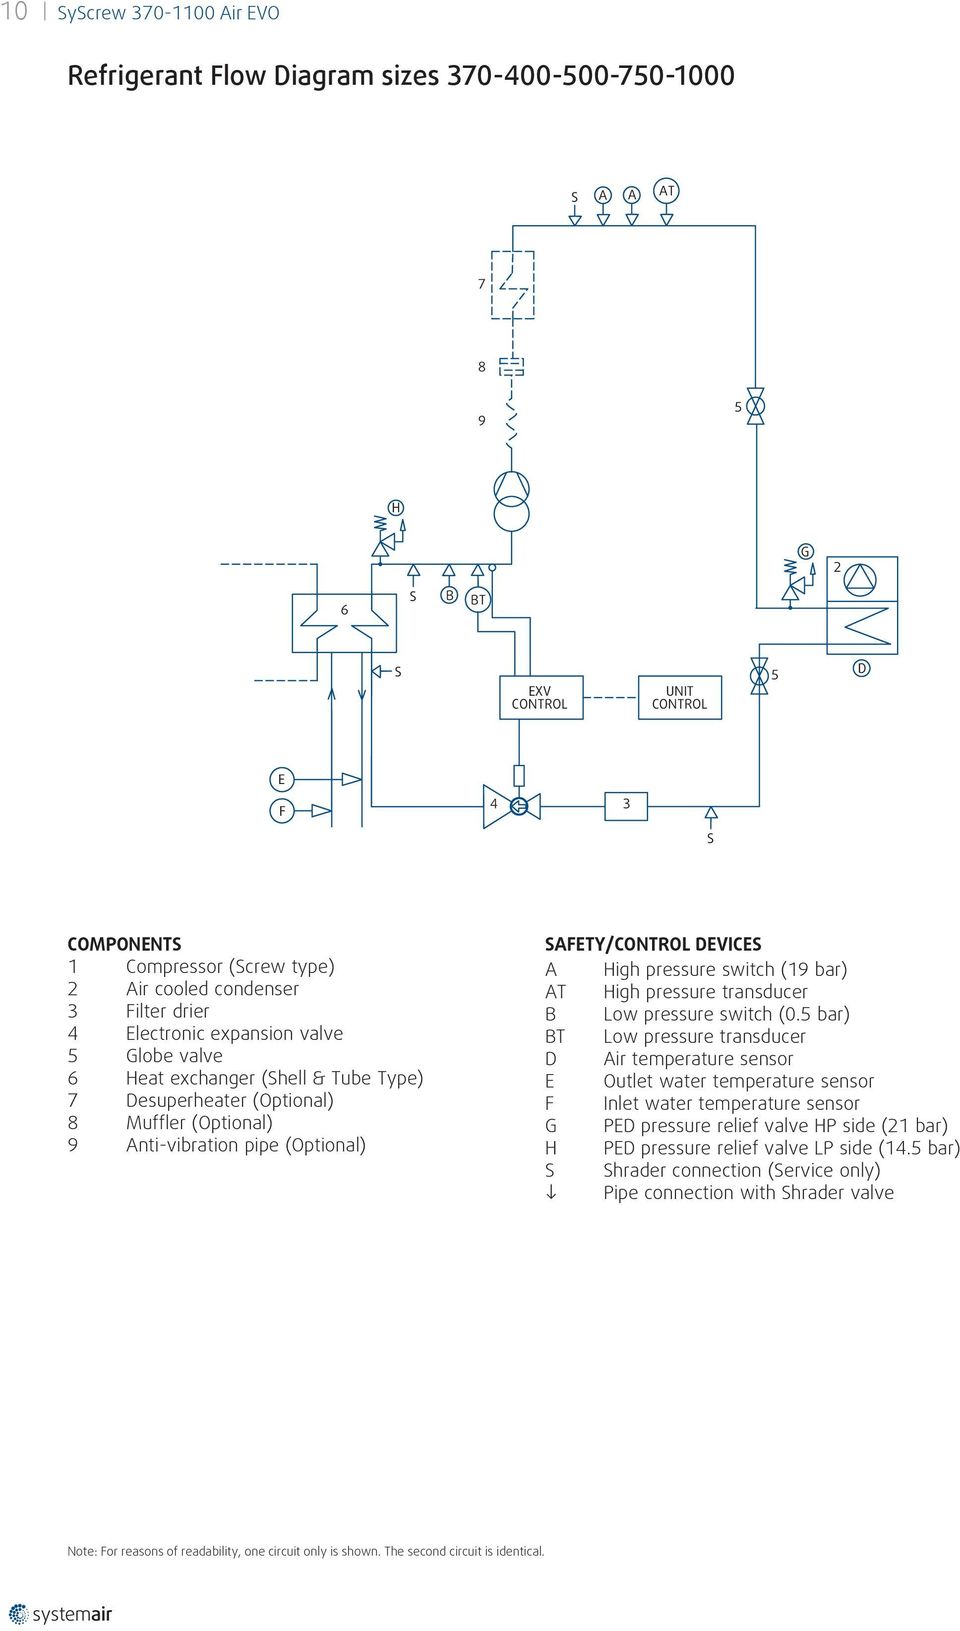 SAFETY/CONTROL DEVICES A High pressure switch (19 bar) AT High pressure transducer B Low pressure switch (0.